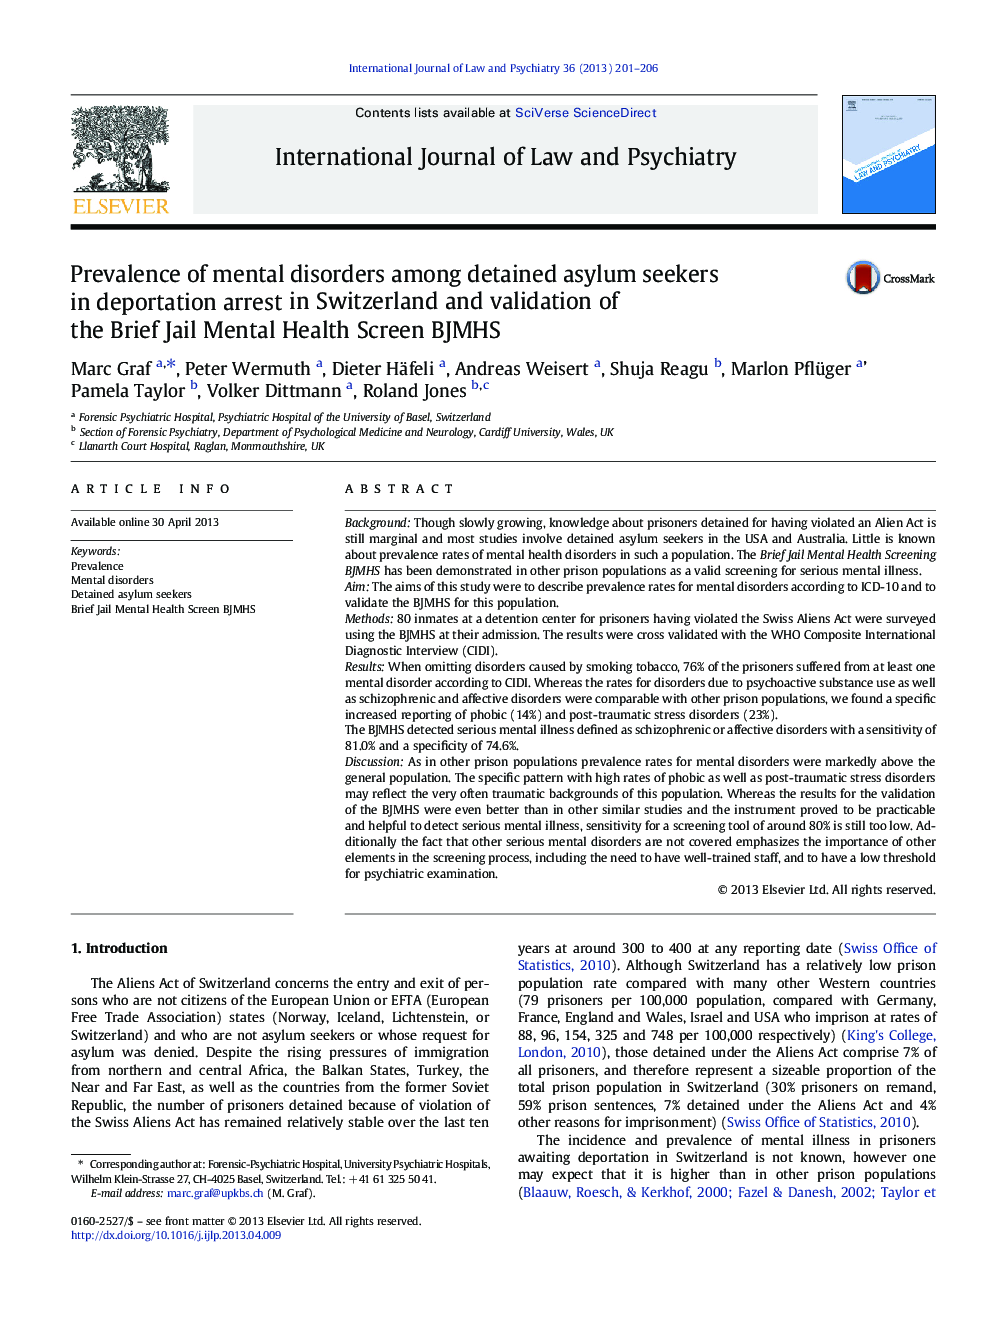 Prevalence of mental disorders among detained asylum seekers in deportation arrest in Switzerland and validation of the Brief Jail Mental Health Screen BJMHS